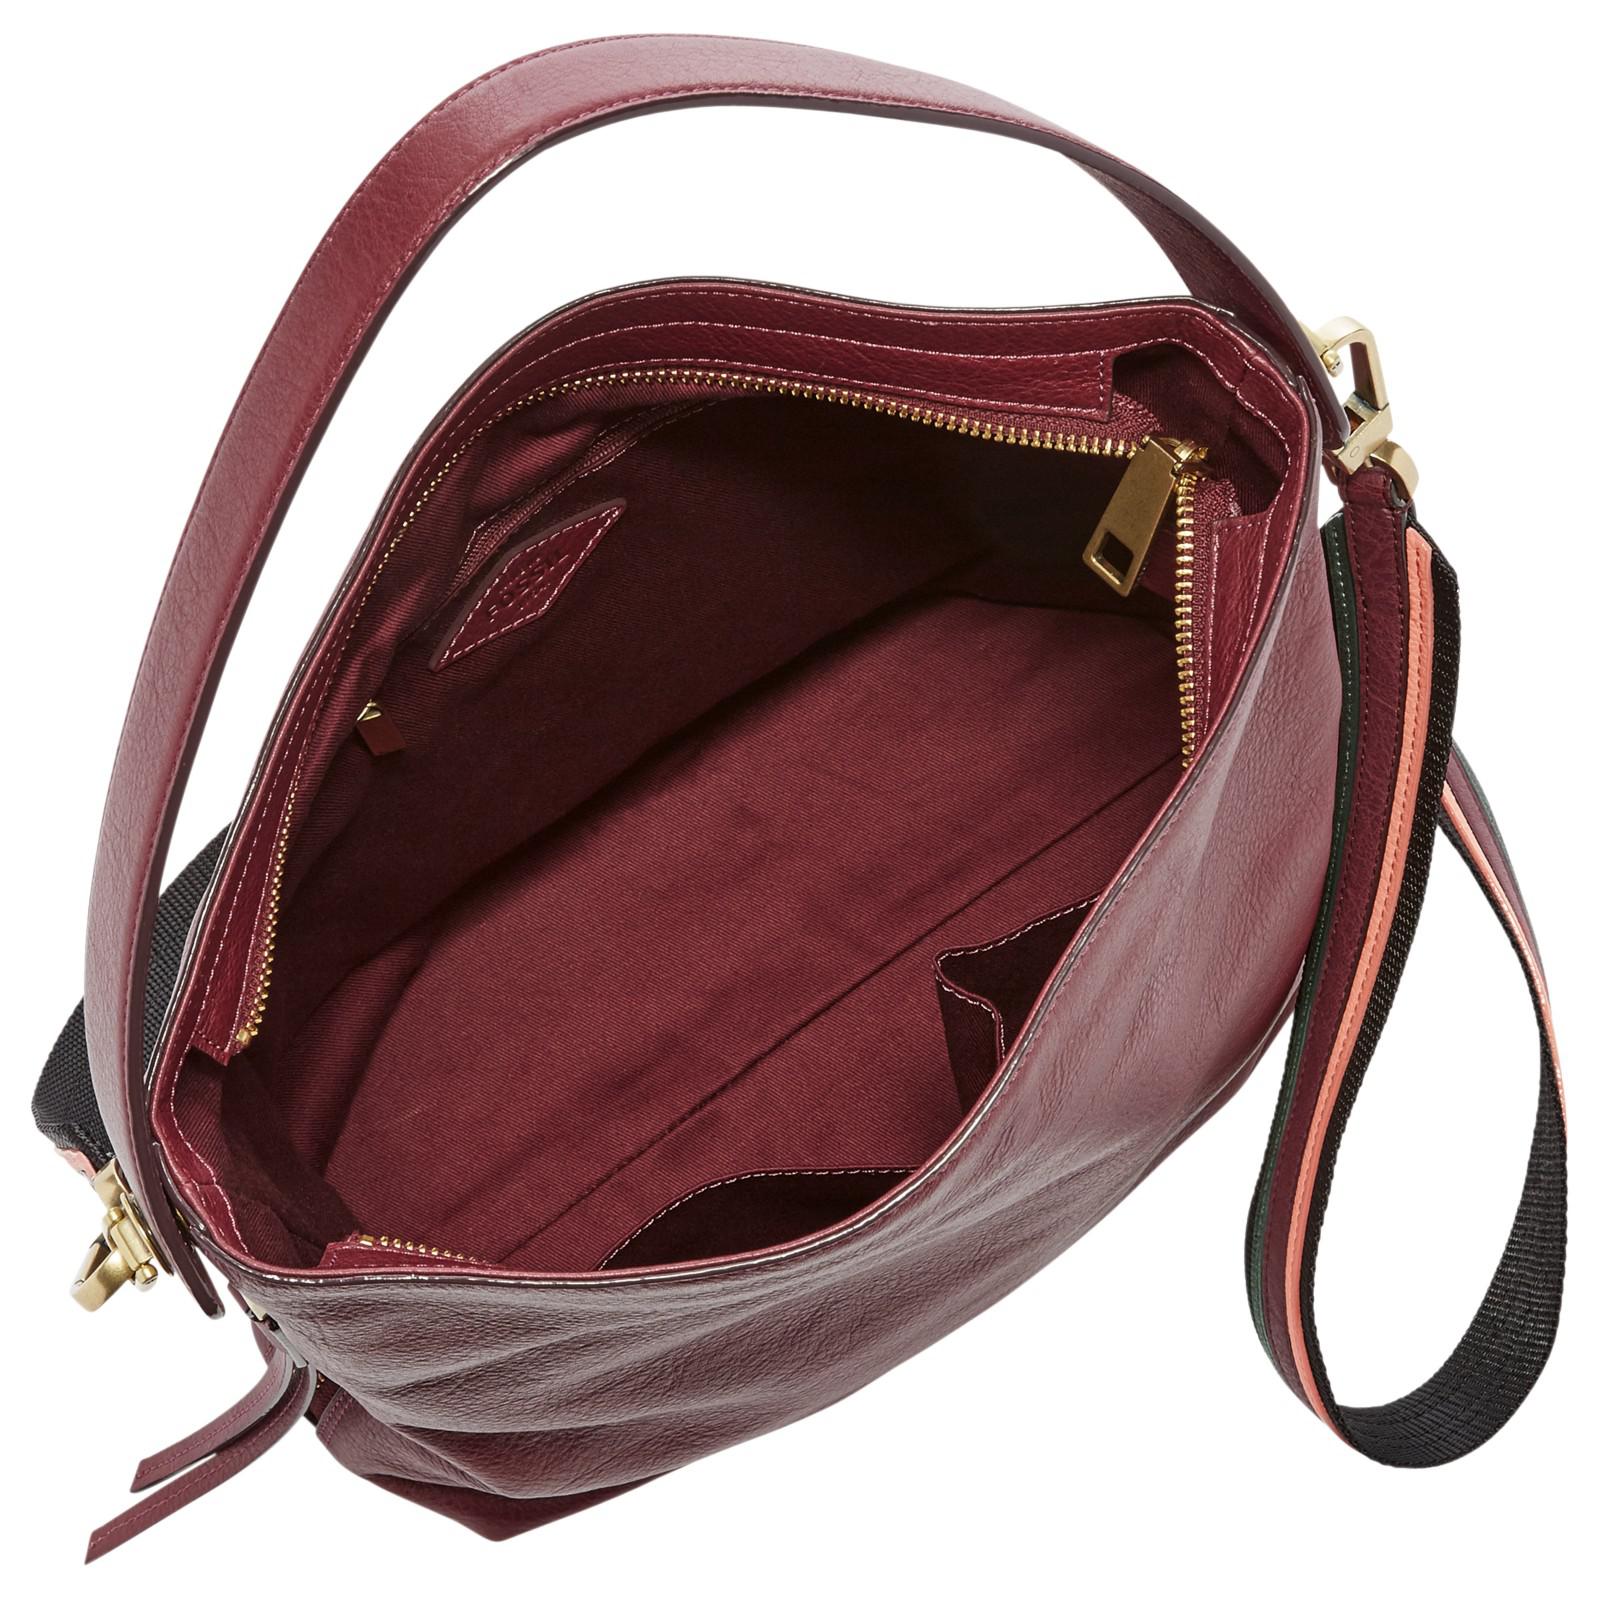 Fossil Maya Small Leather Hobo Bag in Purple - Lyst